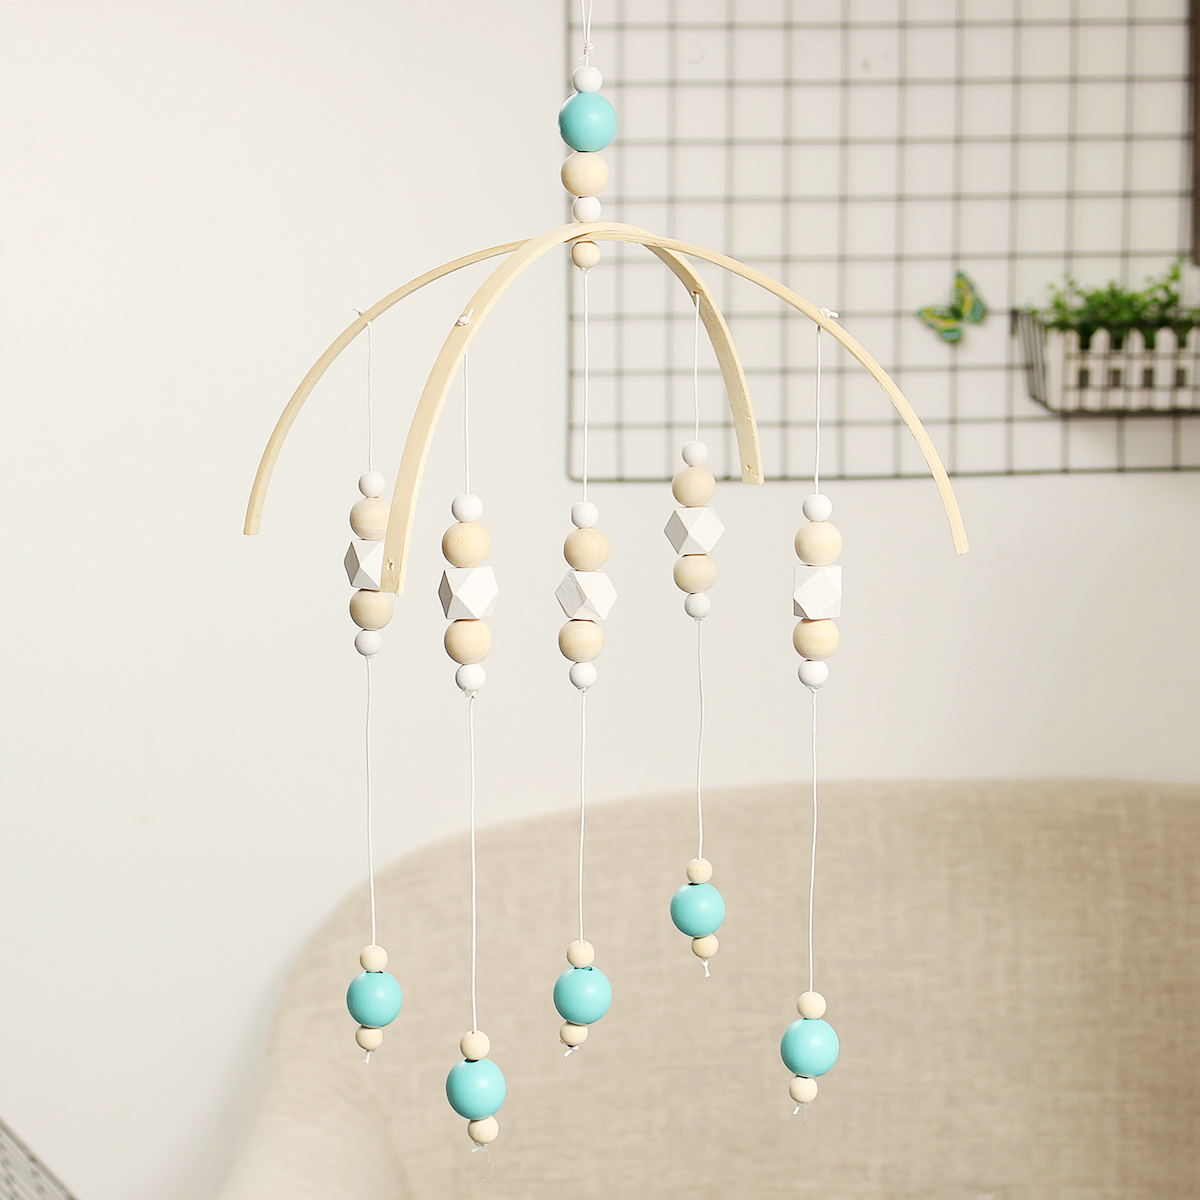 Wooden-Beads-Wind-Chimes-with-Wool-Balls-Baby-Bed-Hanging-Windbell-Crib-Tent-Kids-Room-Decorations-O-1906546-7